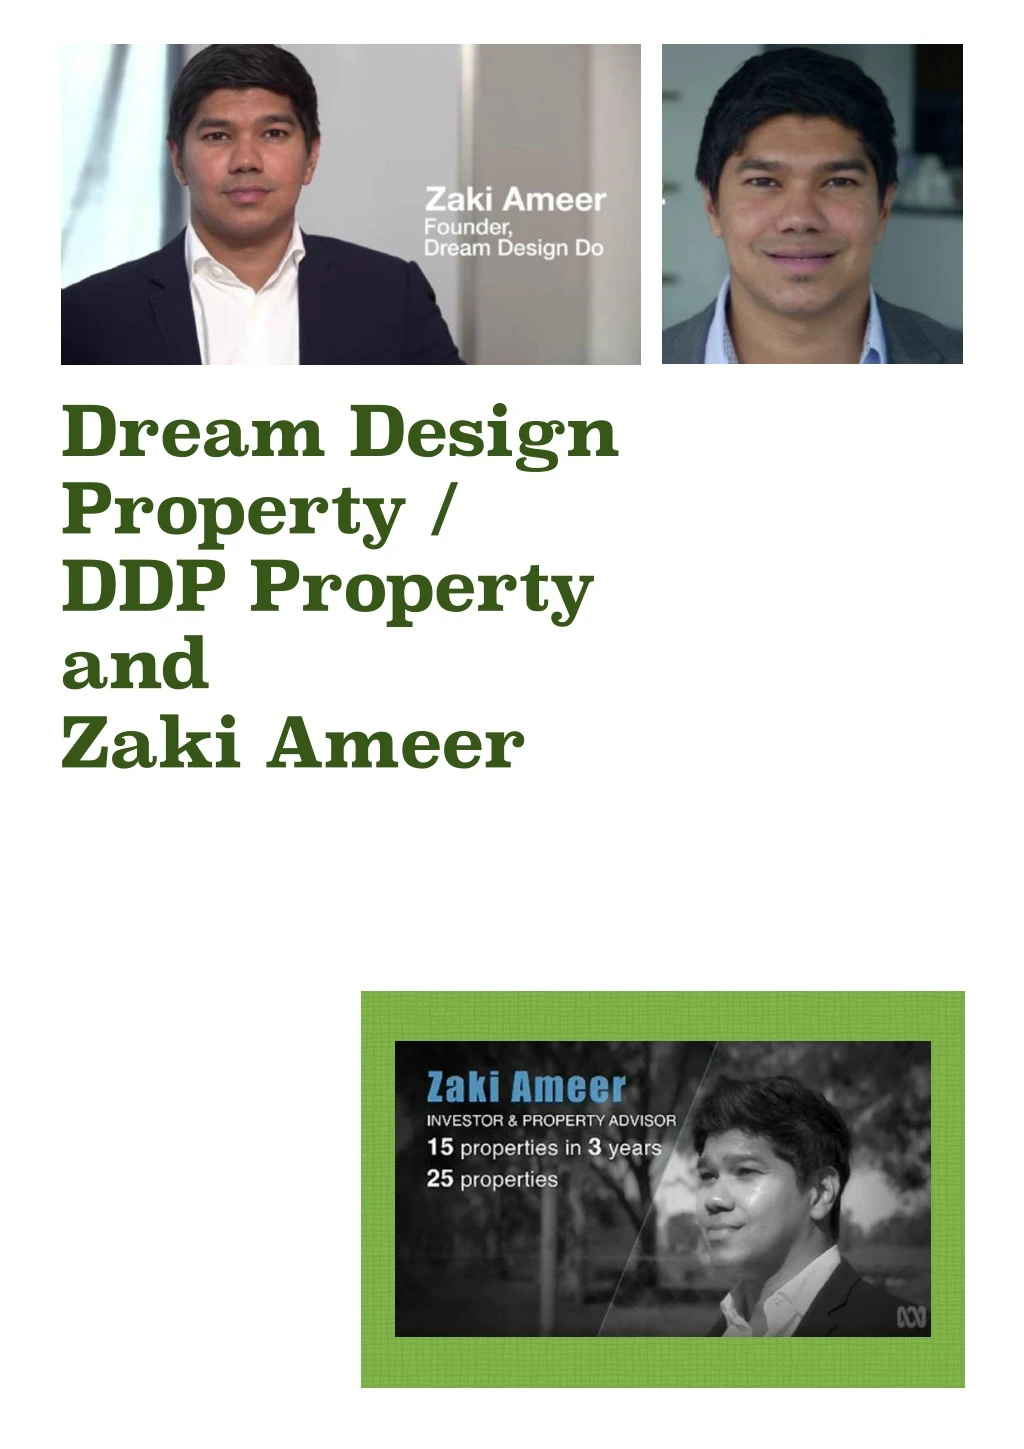 dream design property ddp property and zaki ameer